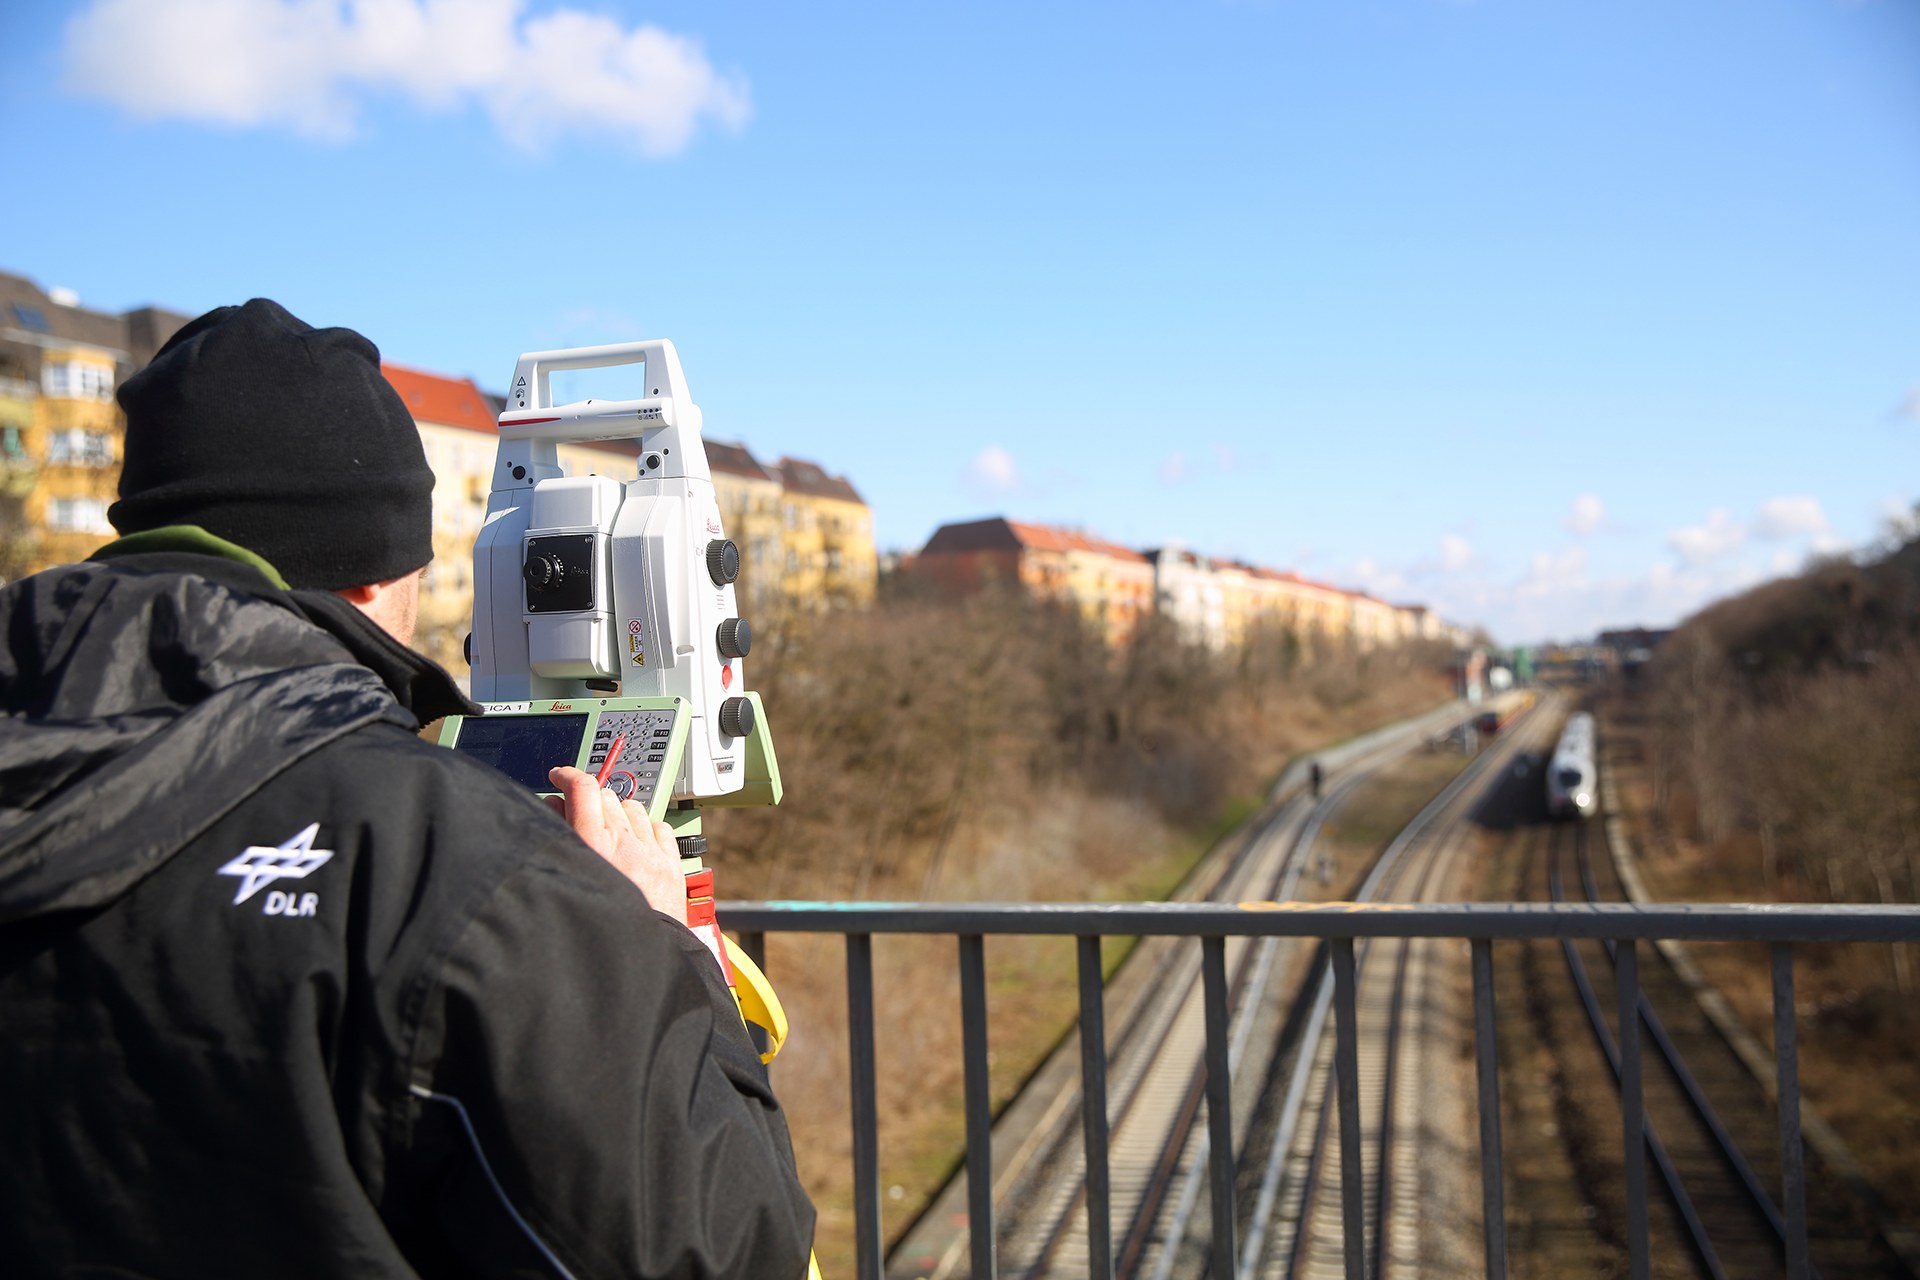 Conducting reference measurements along the route